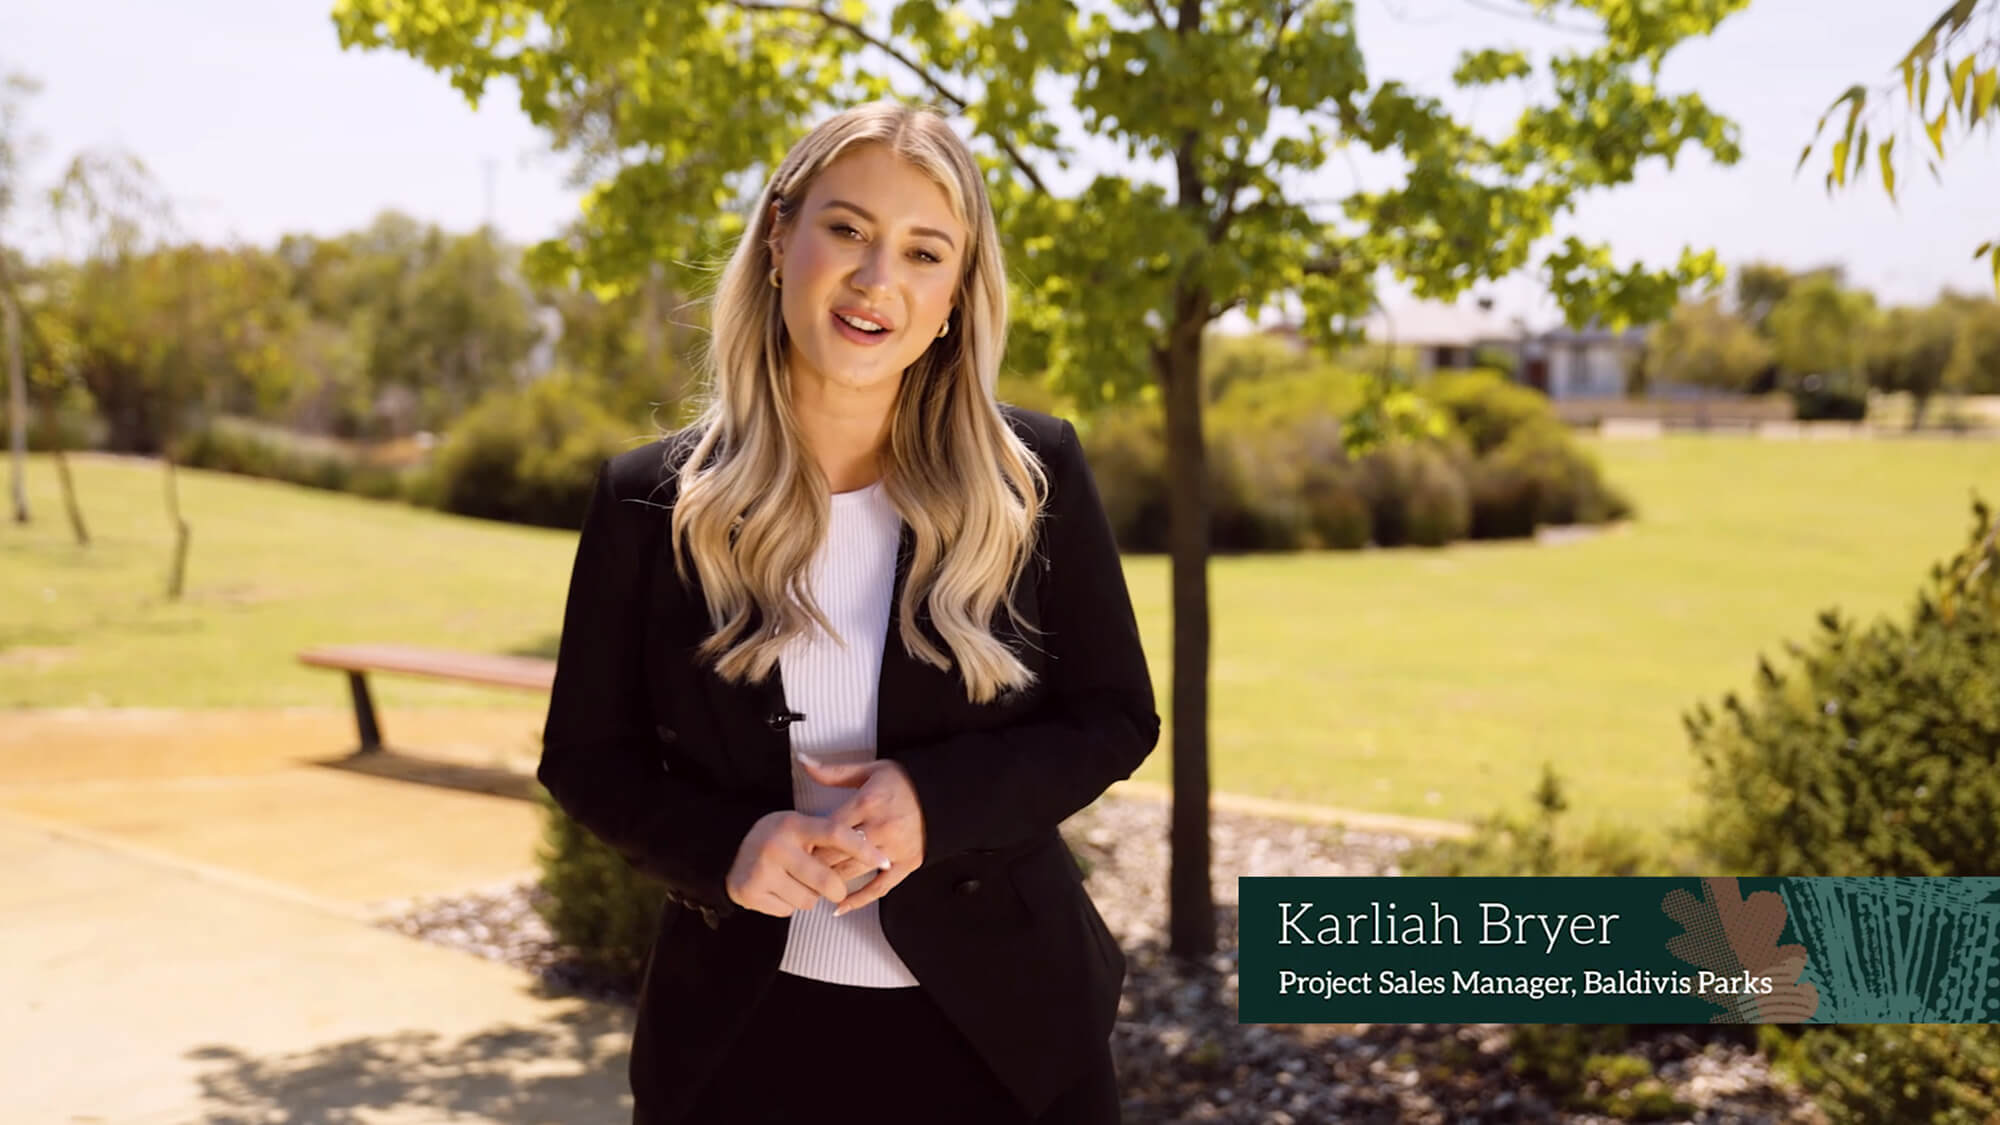 Karliah Bryer - Project Sales Manager at Baldivis Parks